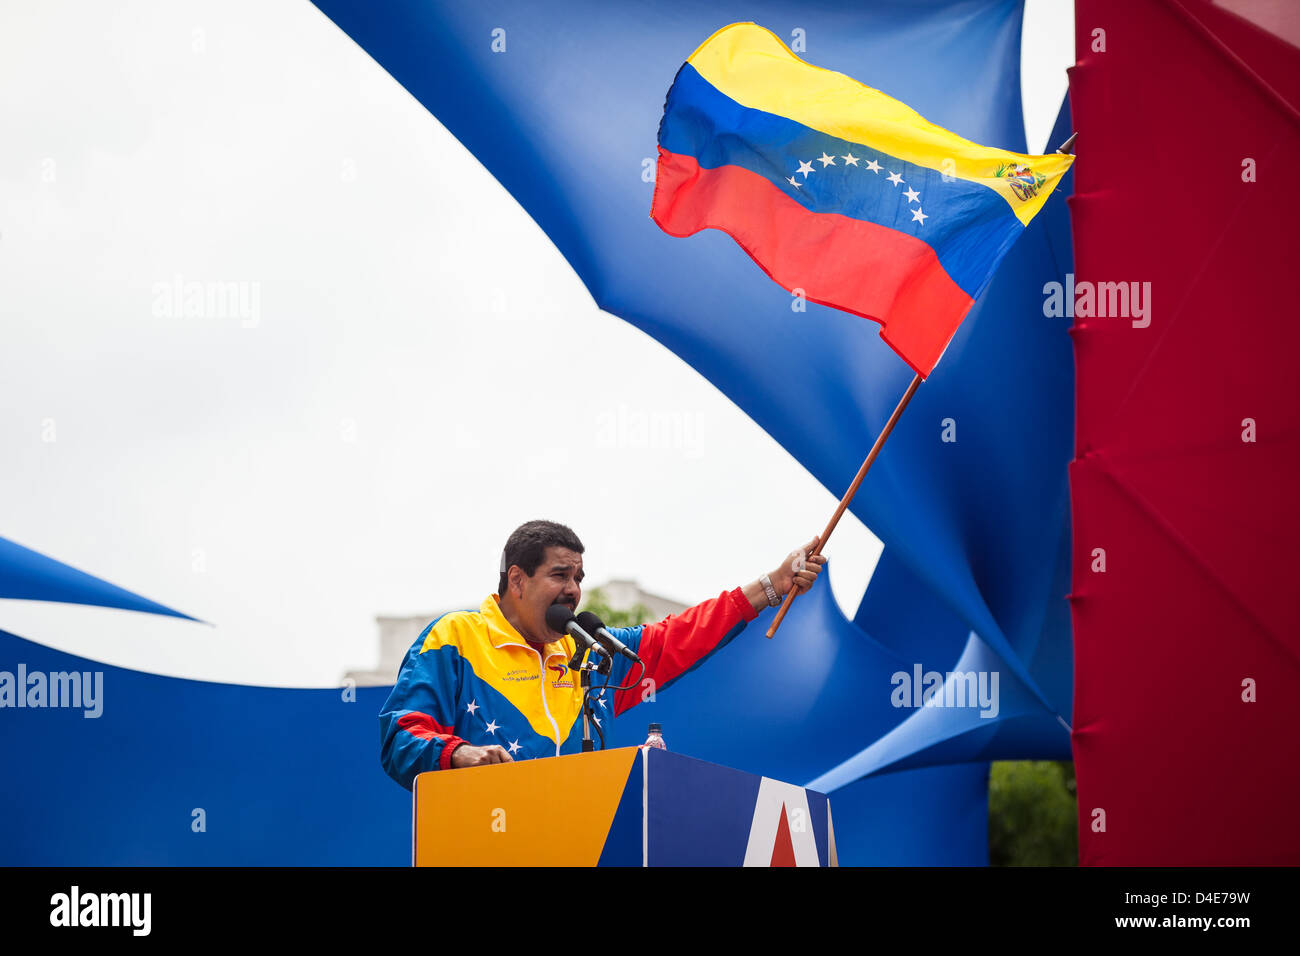 Venezuelan President in Charge Nicolas Maduro waves a national flag during the official registration of his candidacy Stock Photo